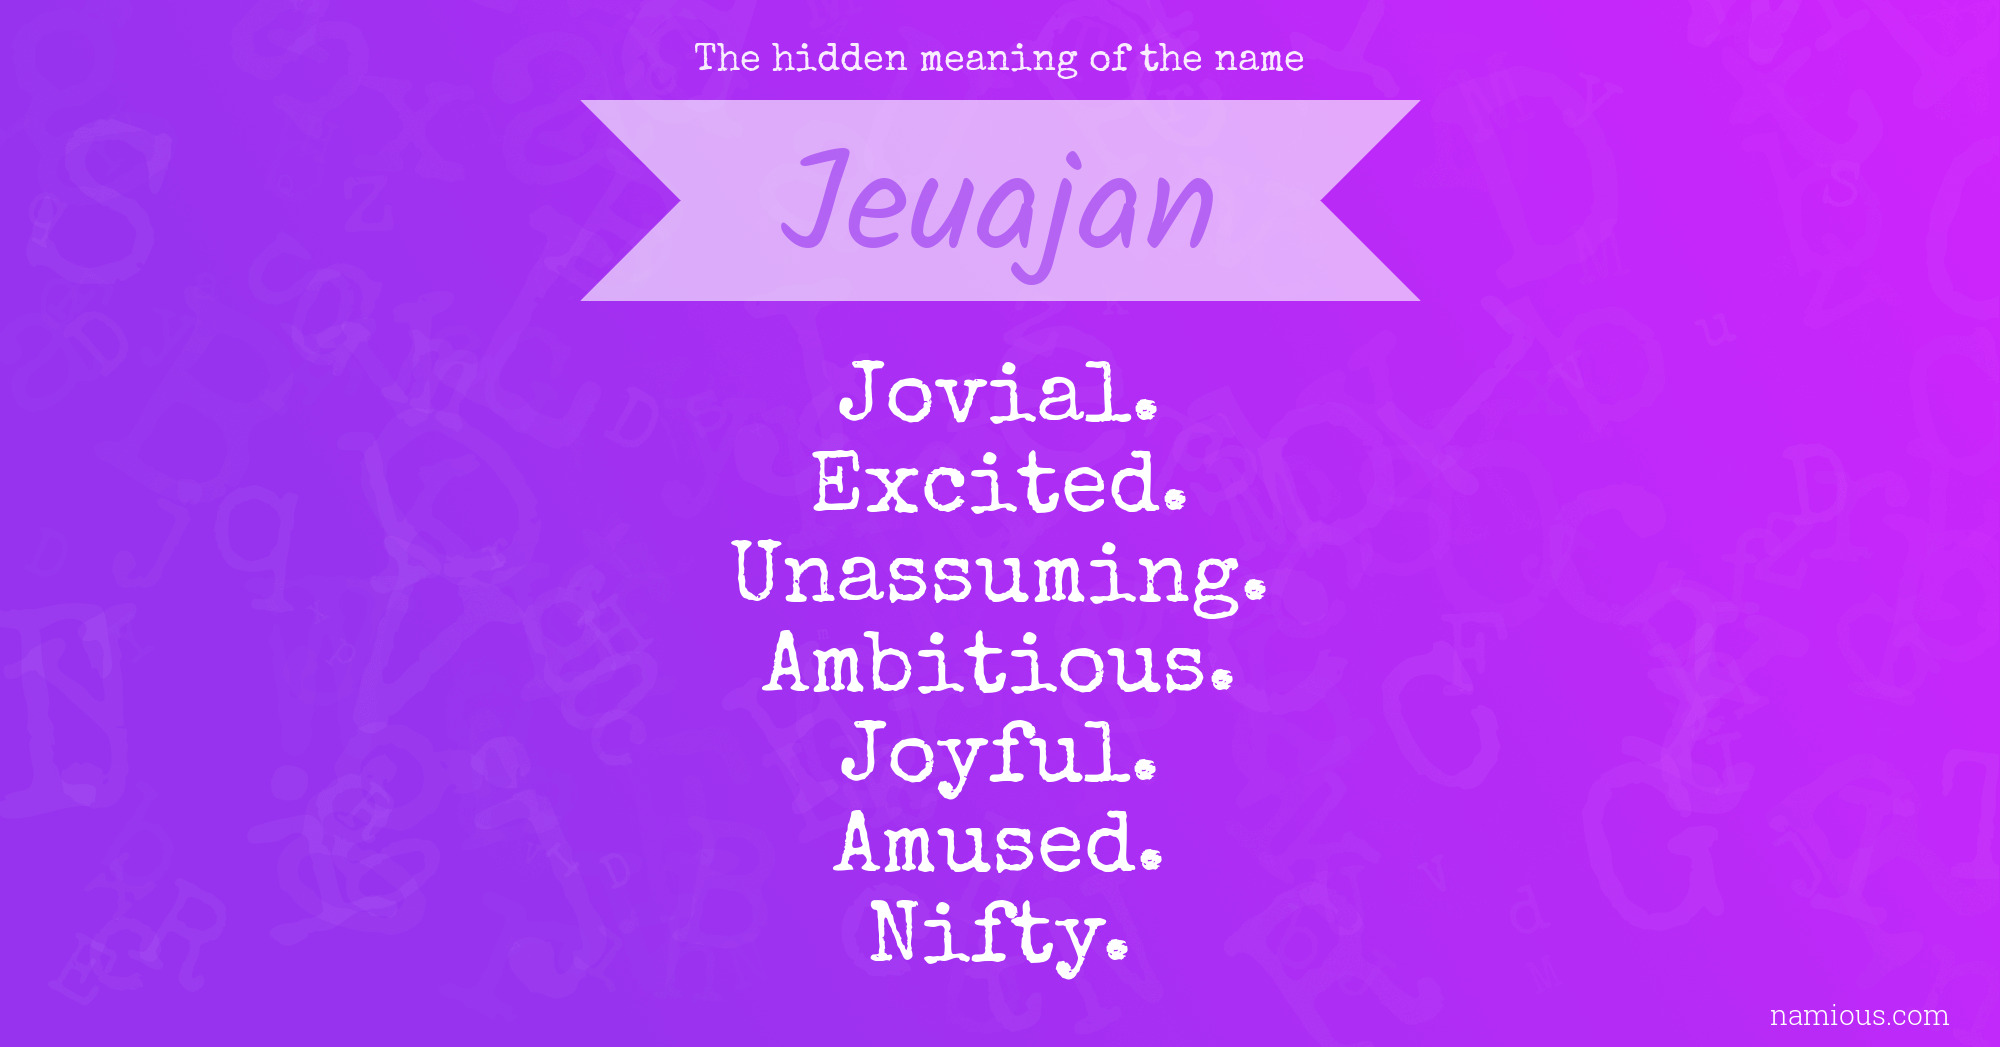 The hidden meaning of the name Jeuajan